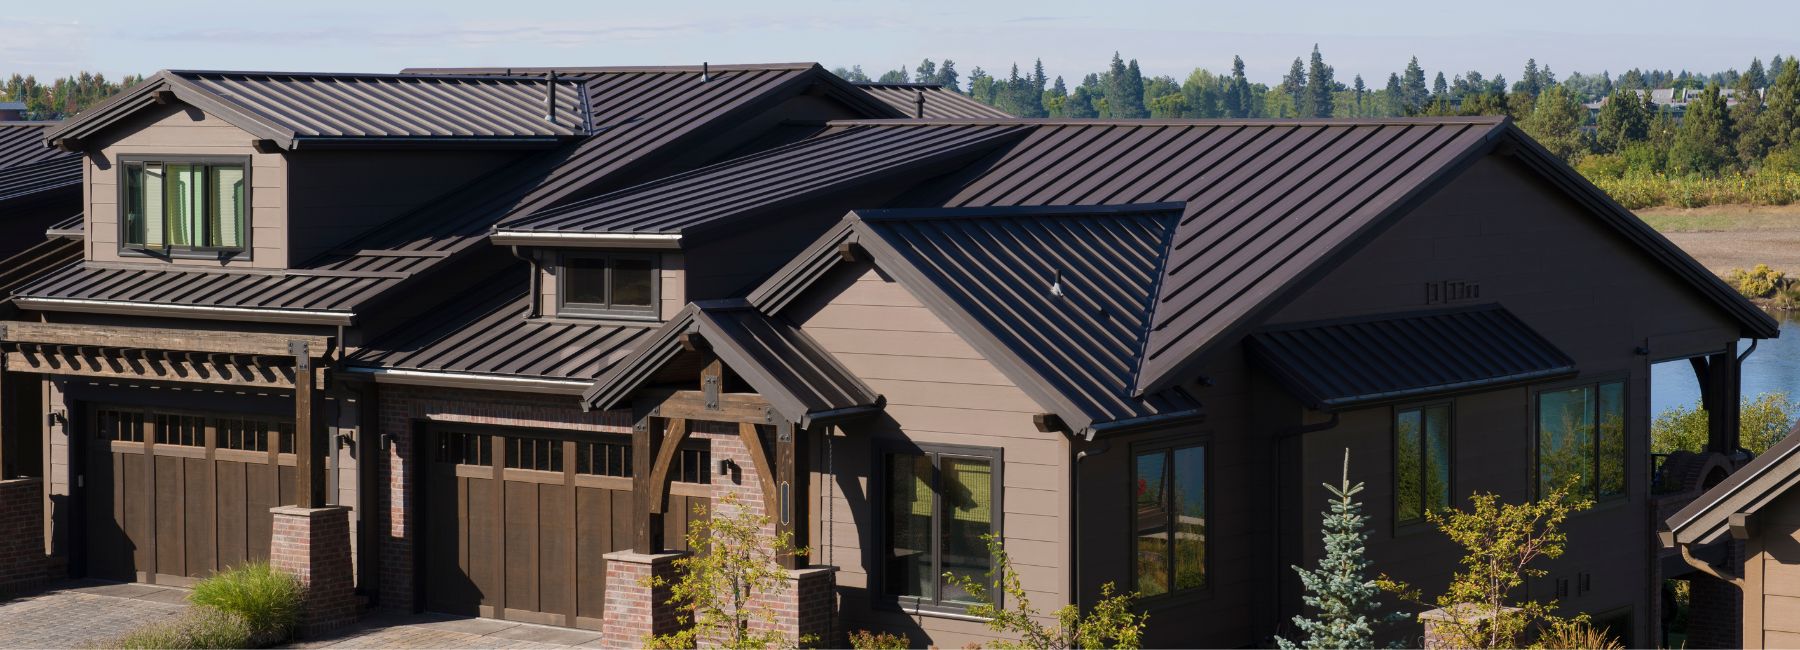 Metal Roofing in Home